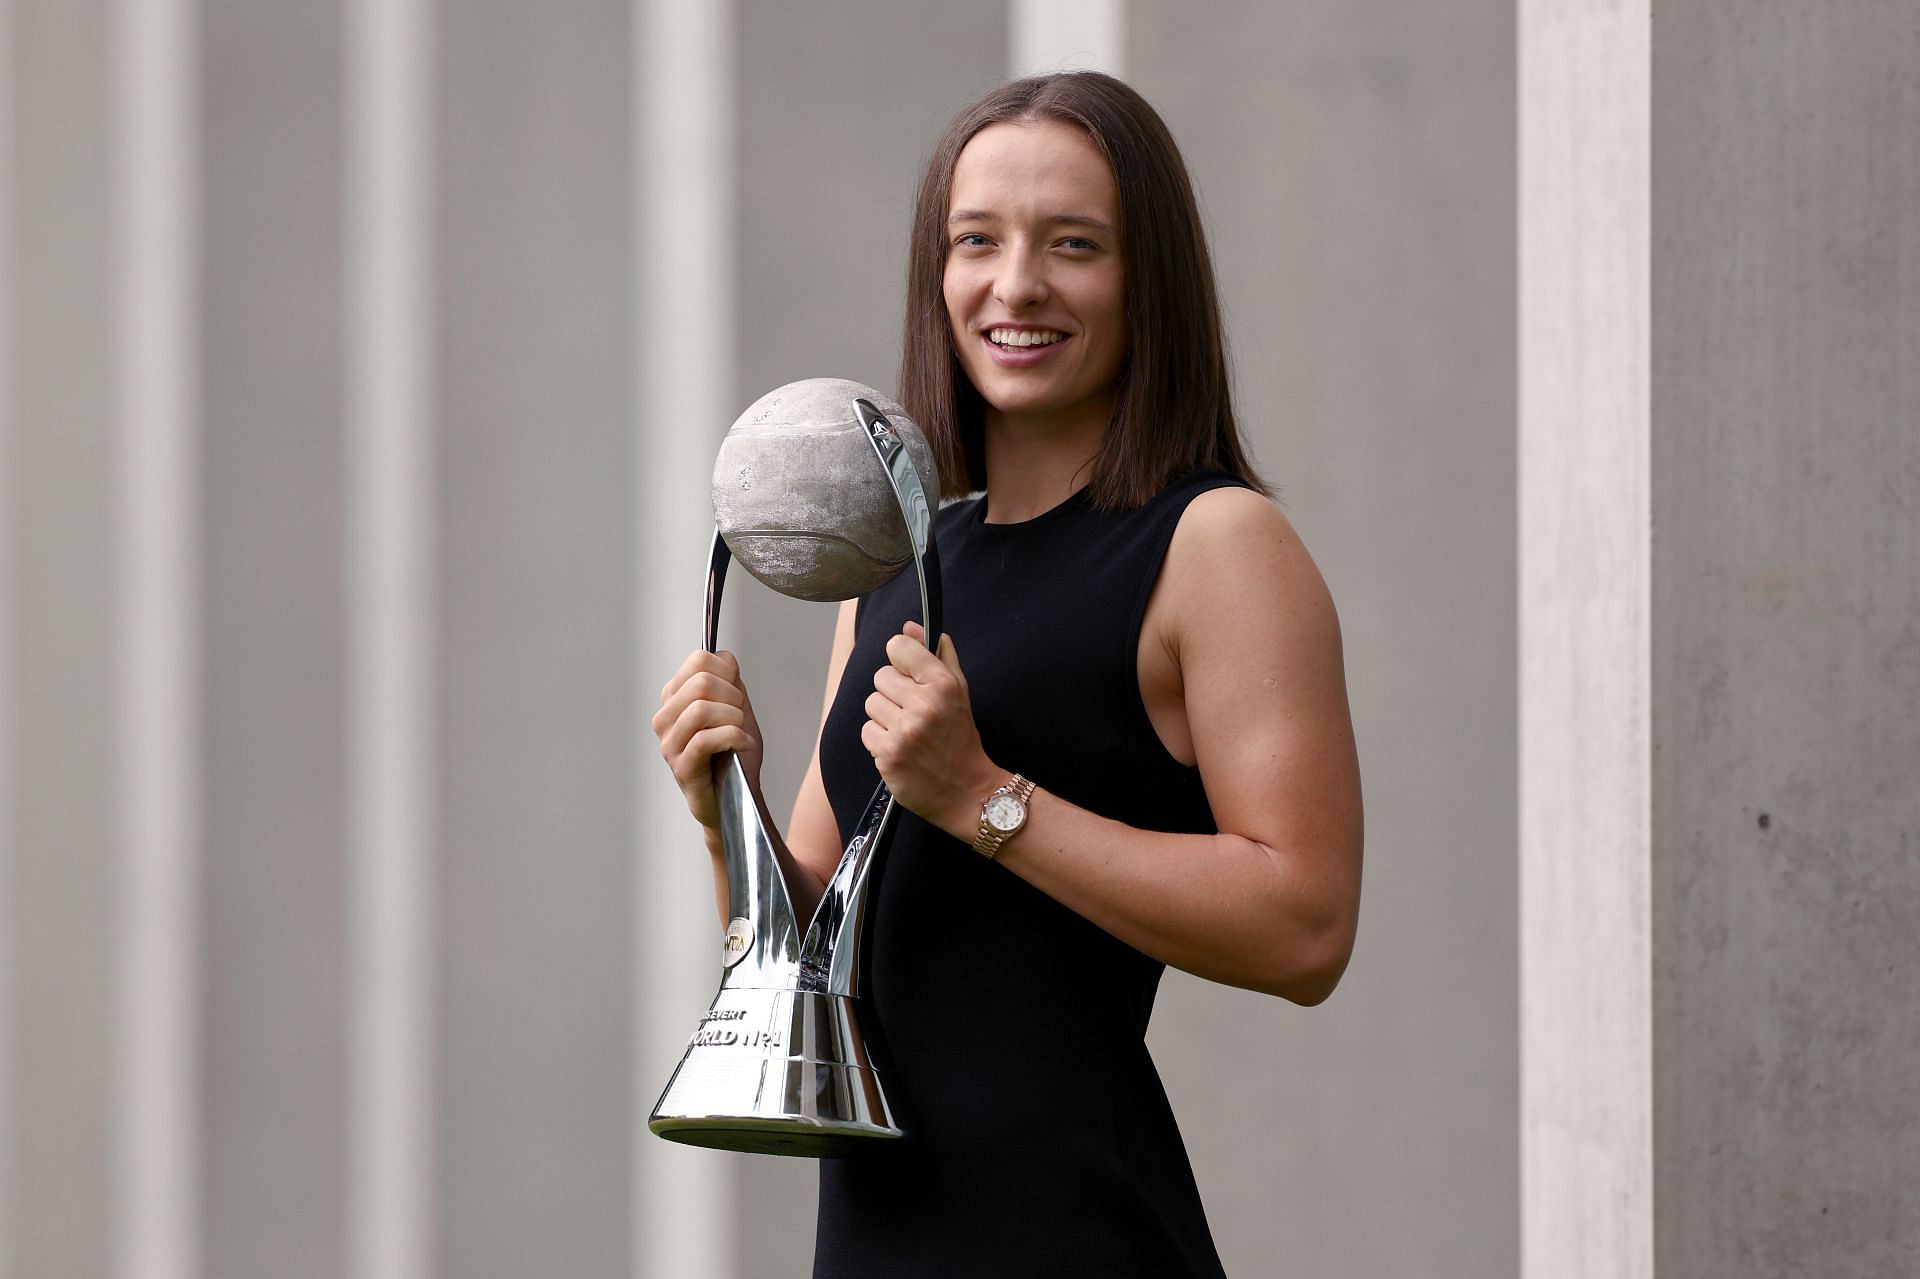 Swiatek poses with the Year-end World No. 1 trophy